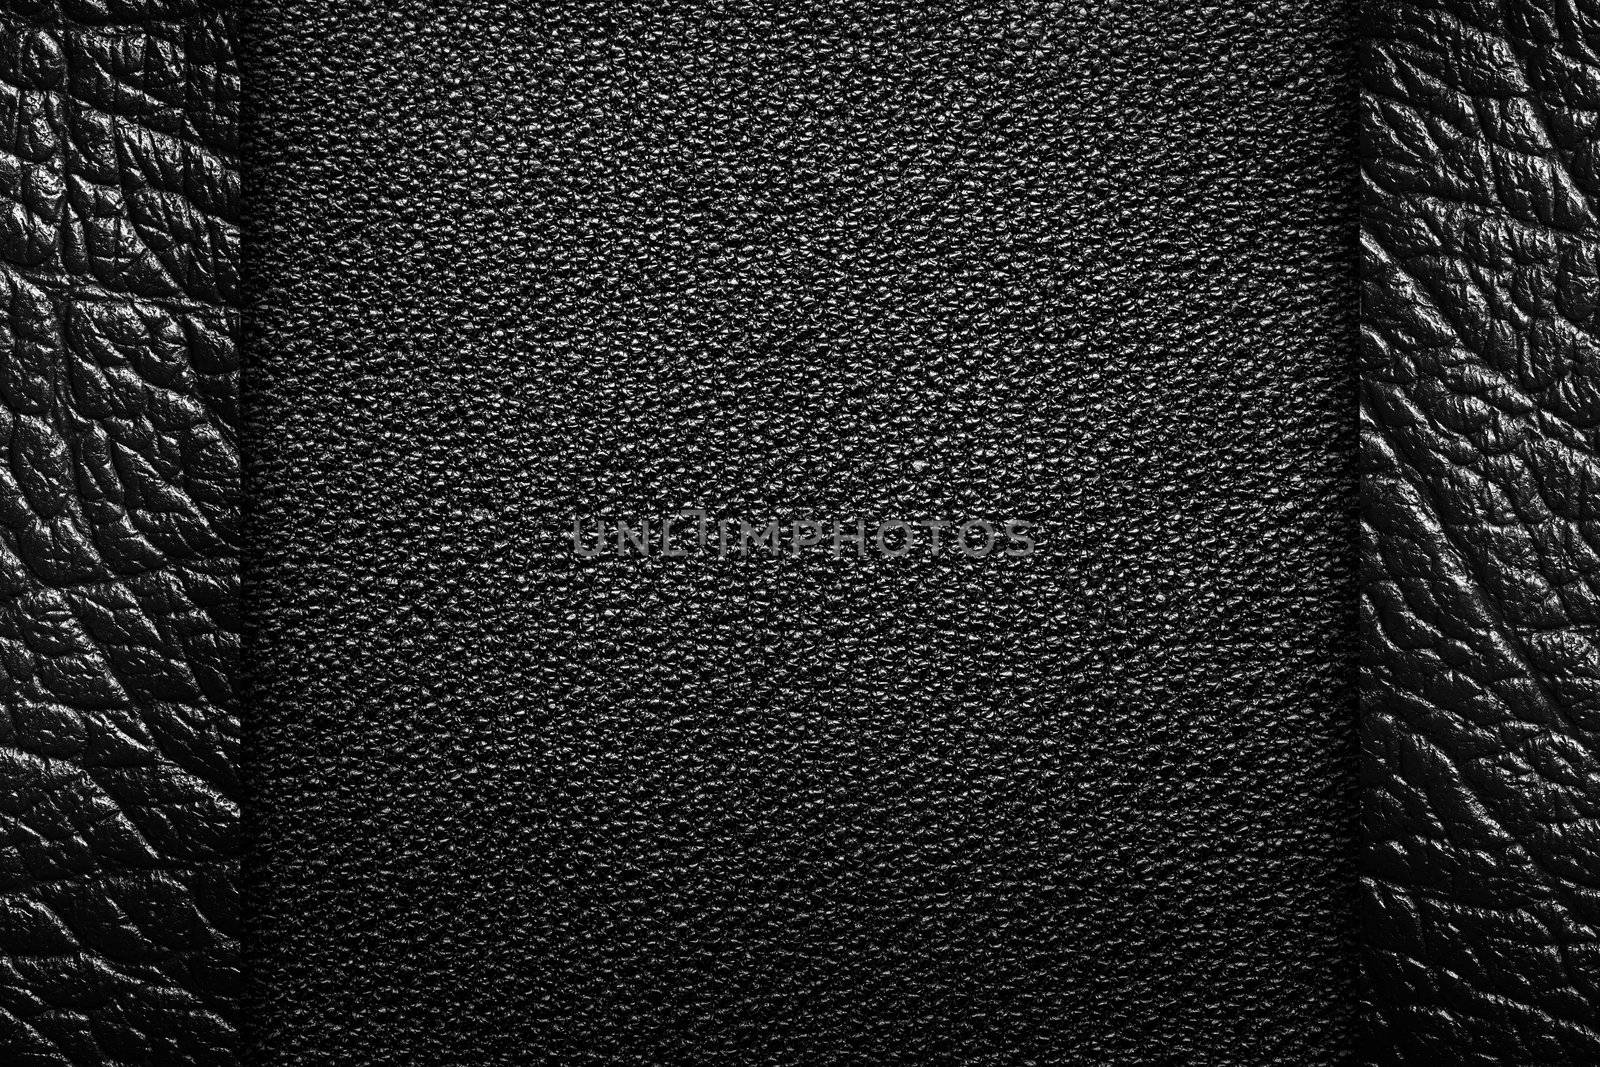 Black leather textures for background, composition with margins